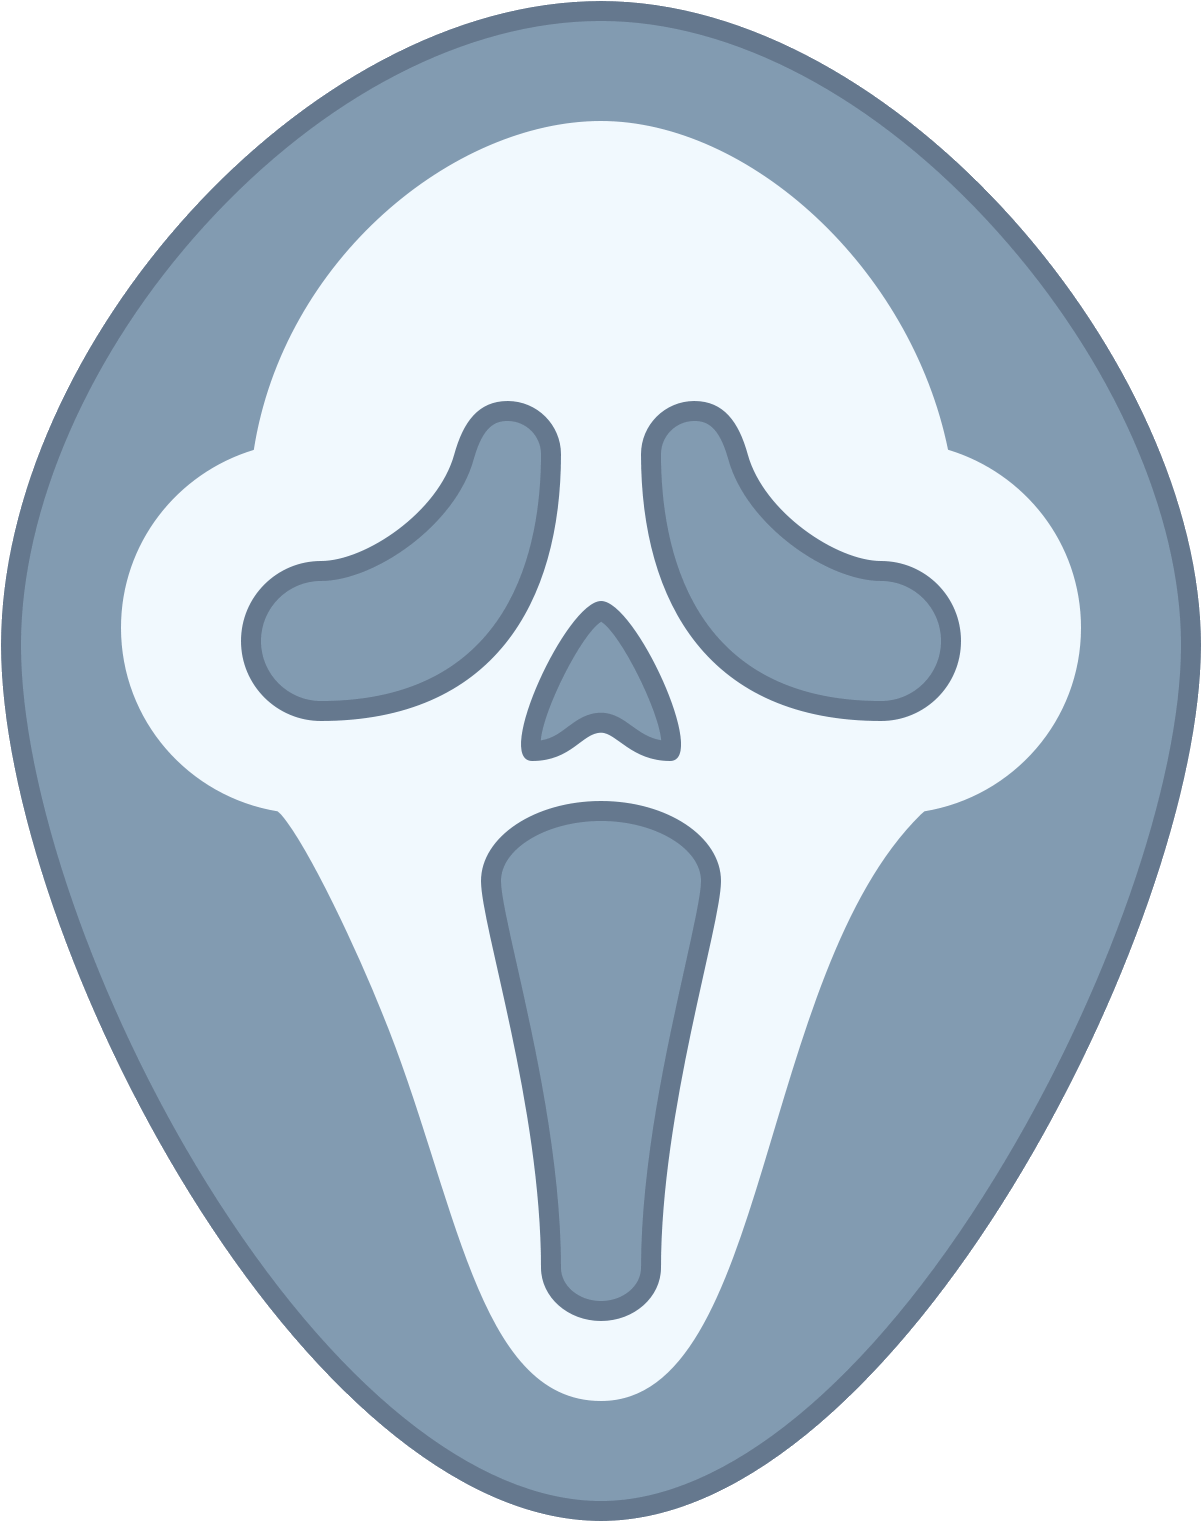 The Icon Is Depicting An Image Of A Mask Popularized - Scream (1600x1600)